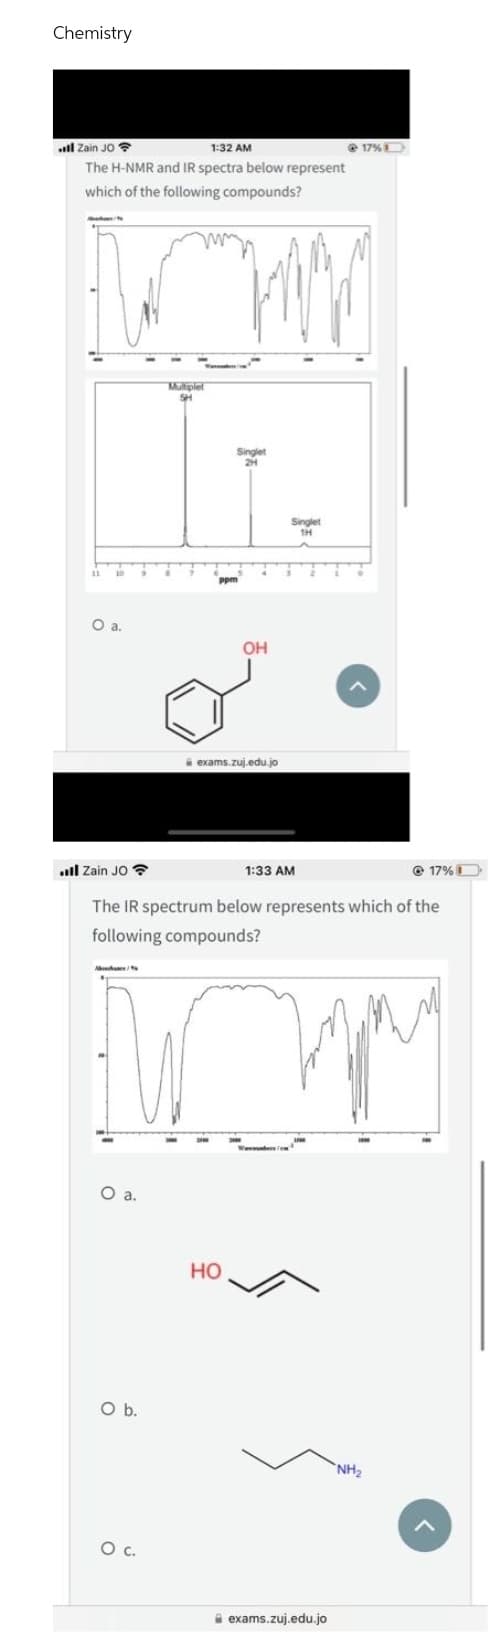 Chemistry
l Zain JO
1:32 AM
The H-NMR and IR spectra below represent
which of the following compounds?
Muhare/to
Multiplel
5H
O a.
O b.
O C.
Singlet
OH
exams.zuj.edu.jo
Zain JO
1:33 AM
17% 1
The IR spectrum below represents which of the
following compounds?
гру
O a.
HO
Singlet
1H
@17%
exams.zuj.edu.jo
NH₂